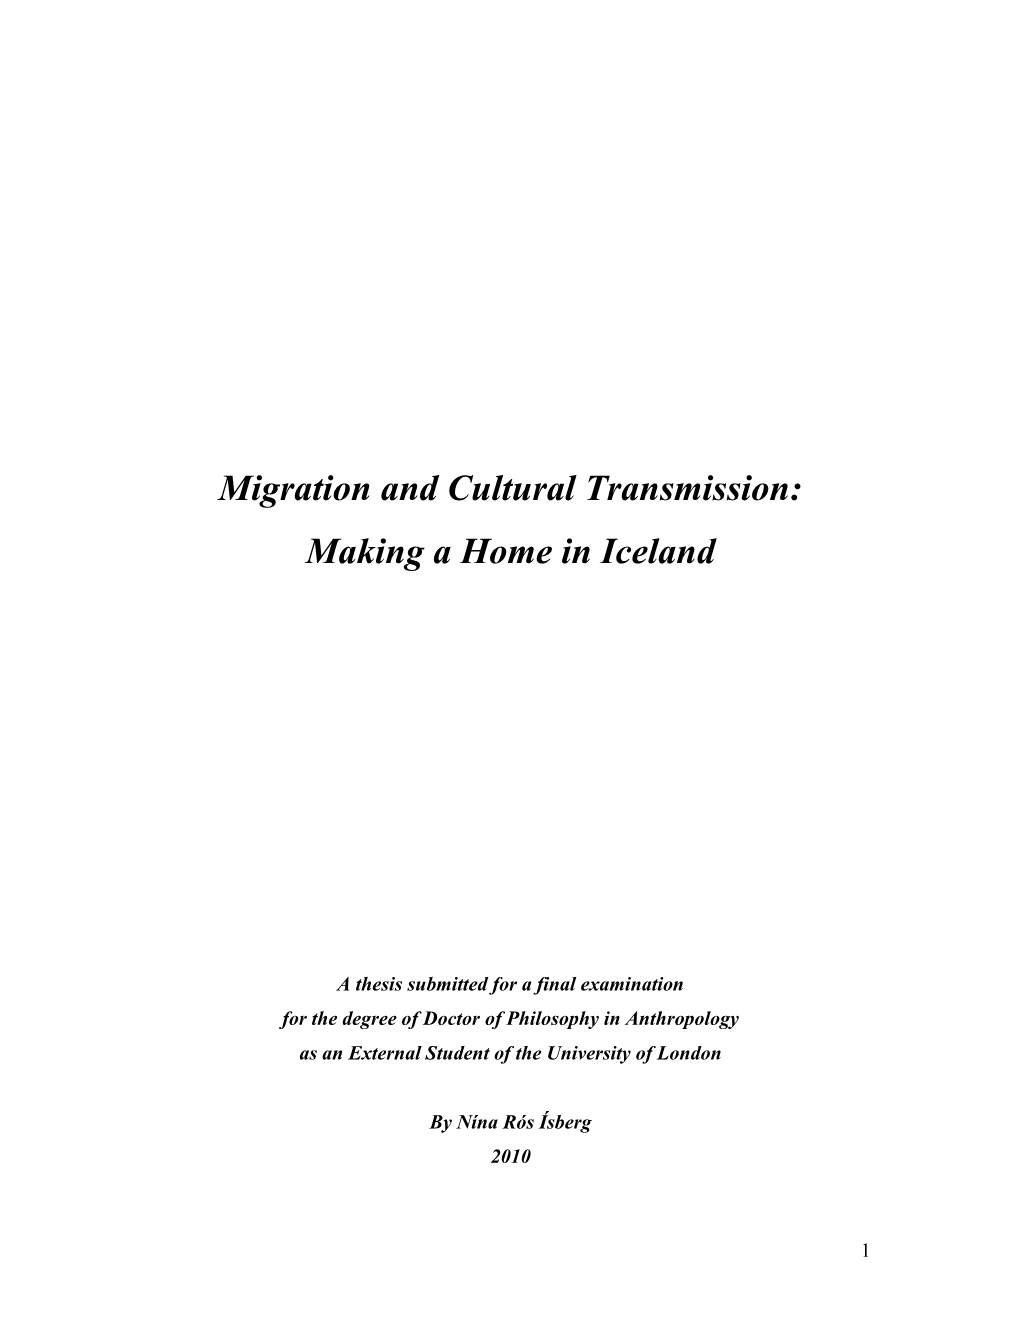 Migration and Cultural Transmission: Making a Home in Iceland